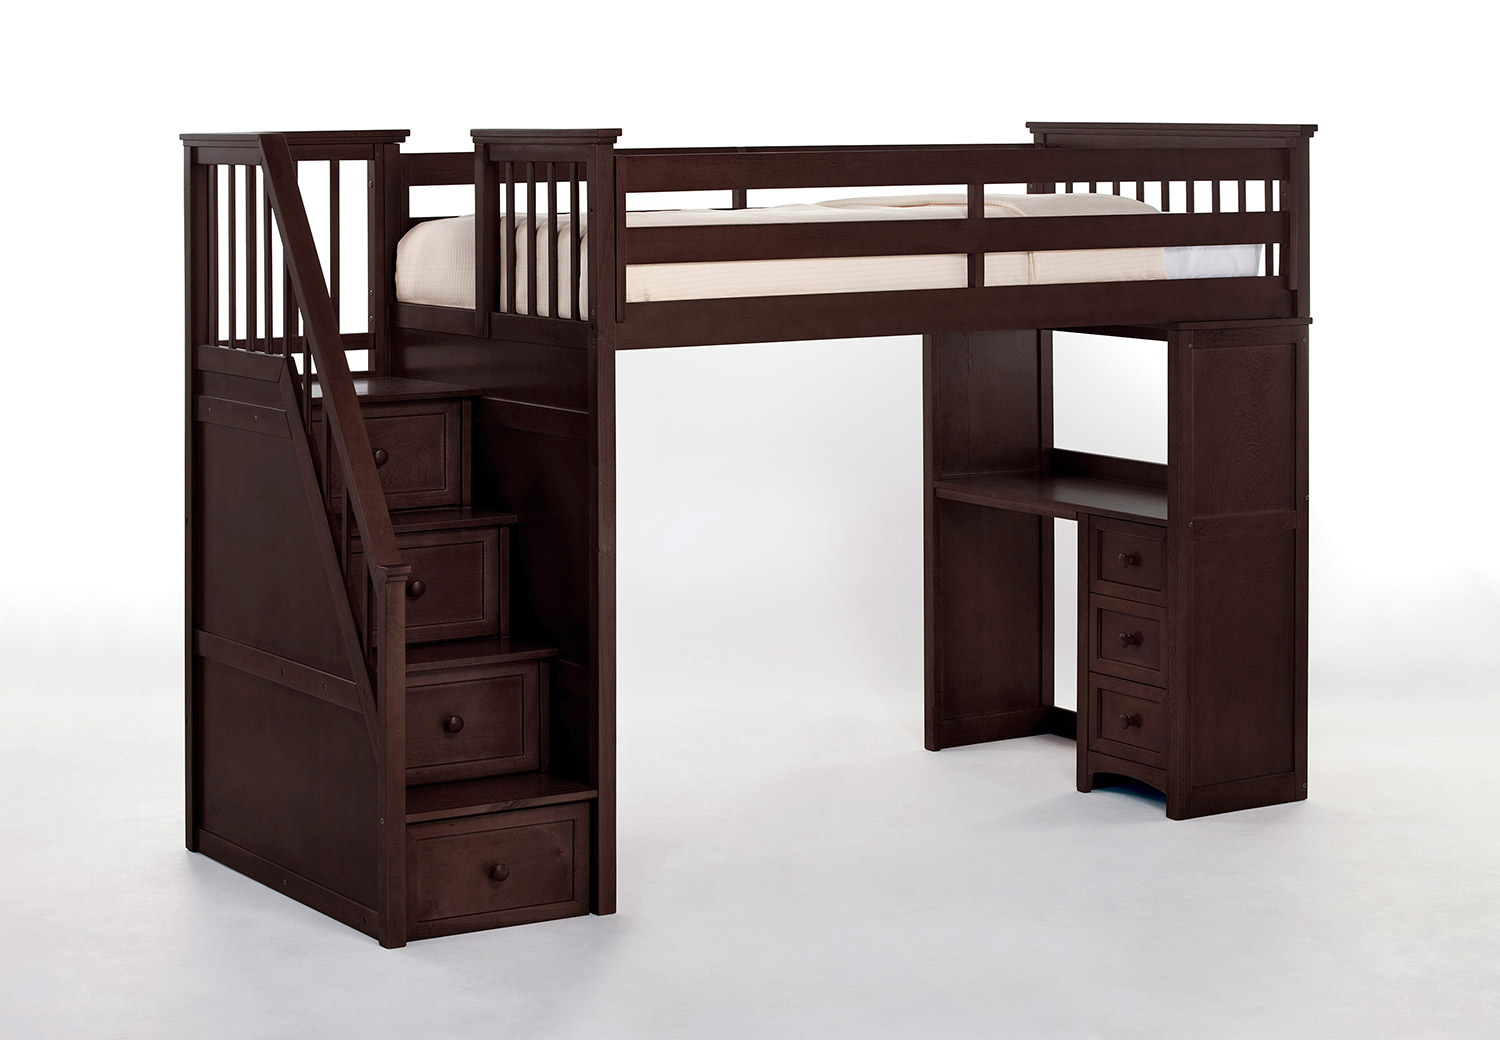 NE Kids SchoolHouse Stair Loft Bed with Desk End - Chocolate